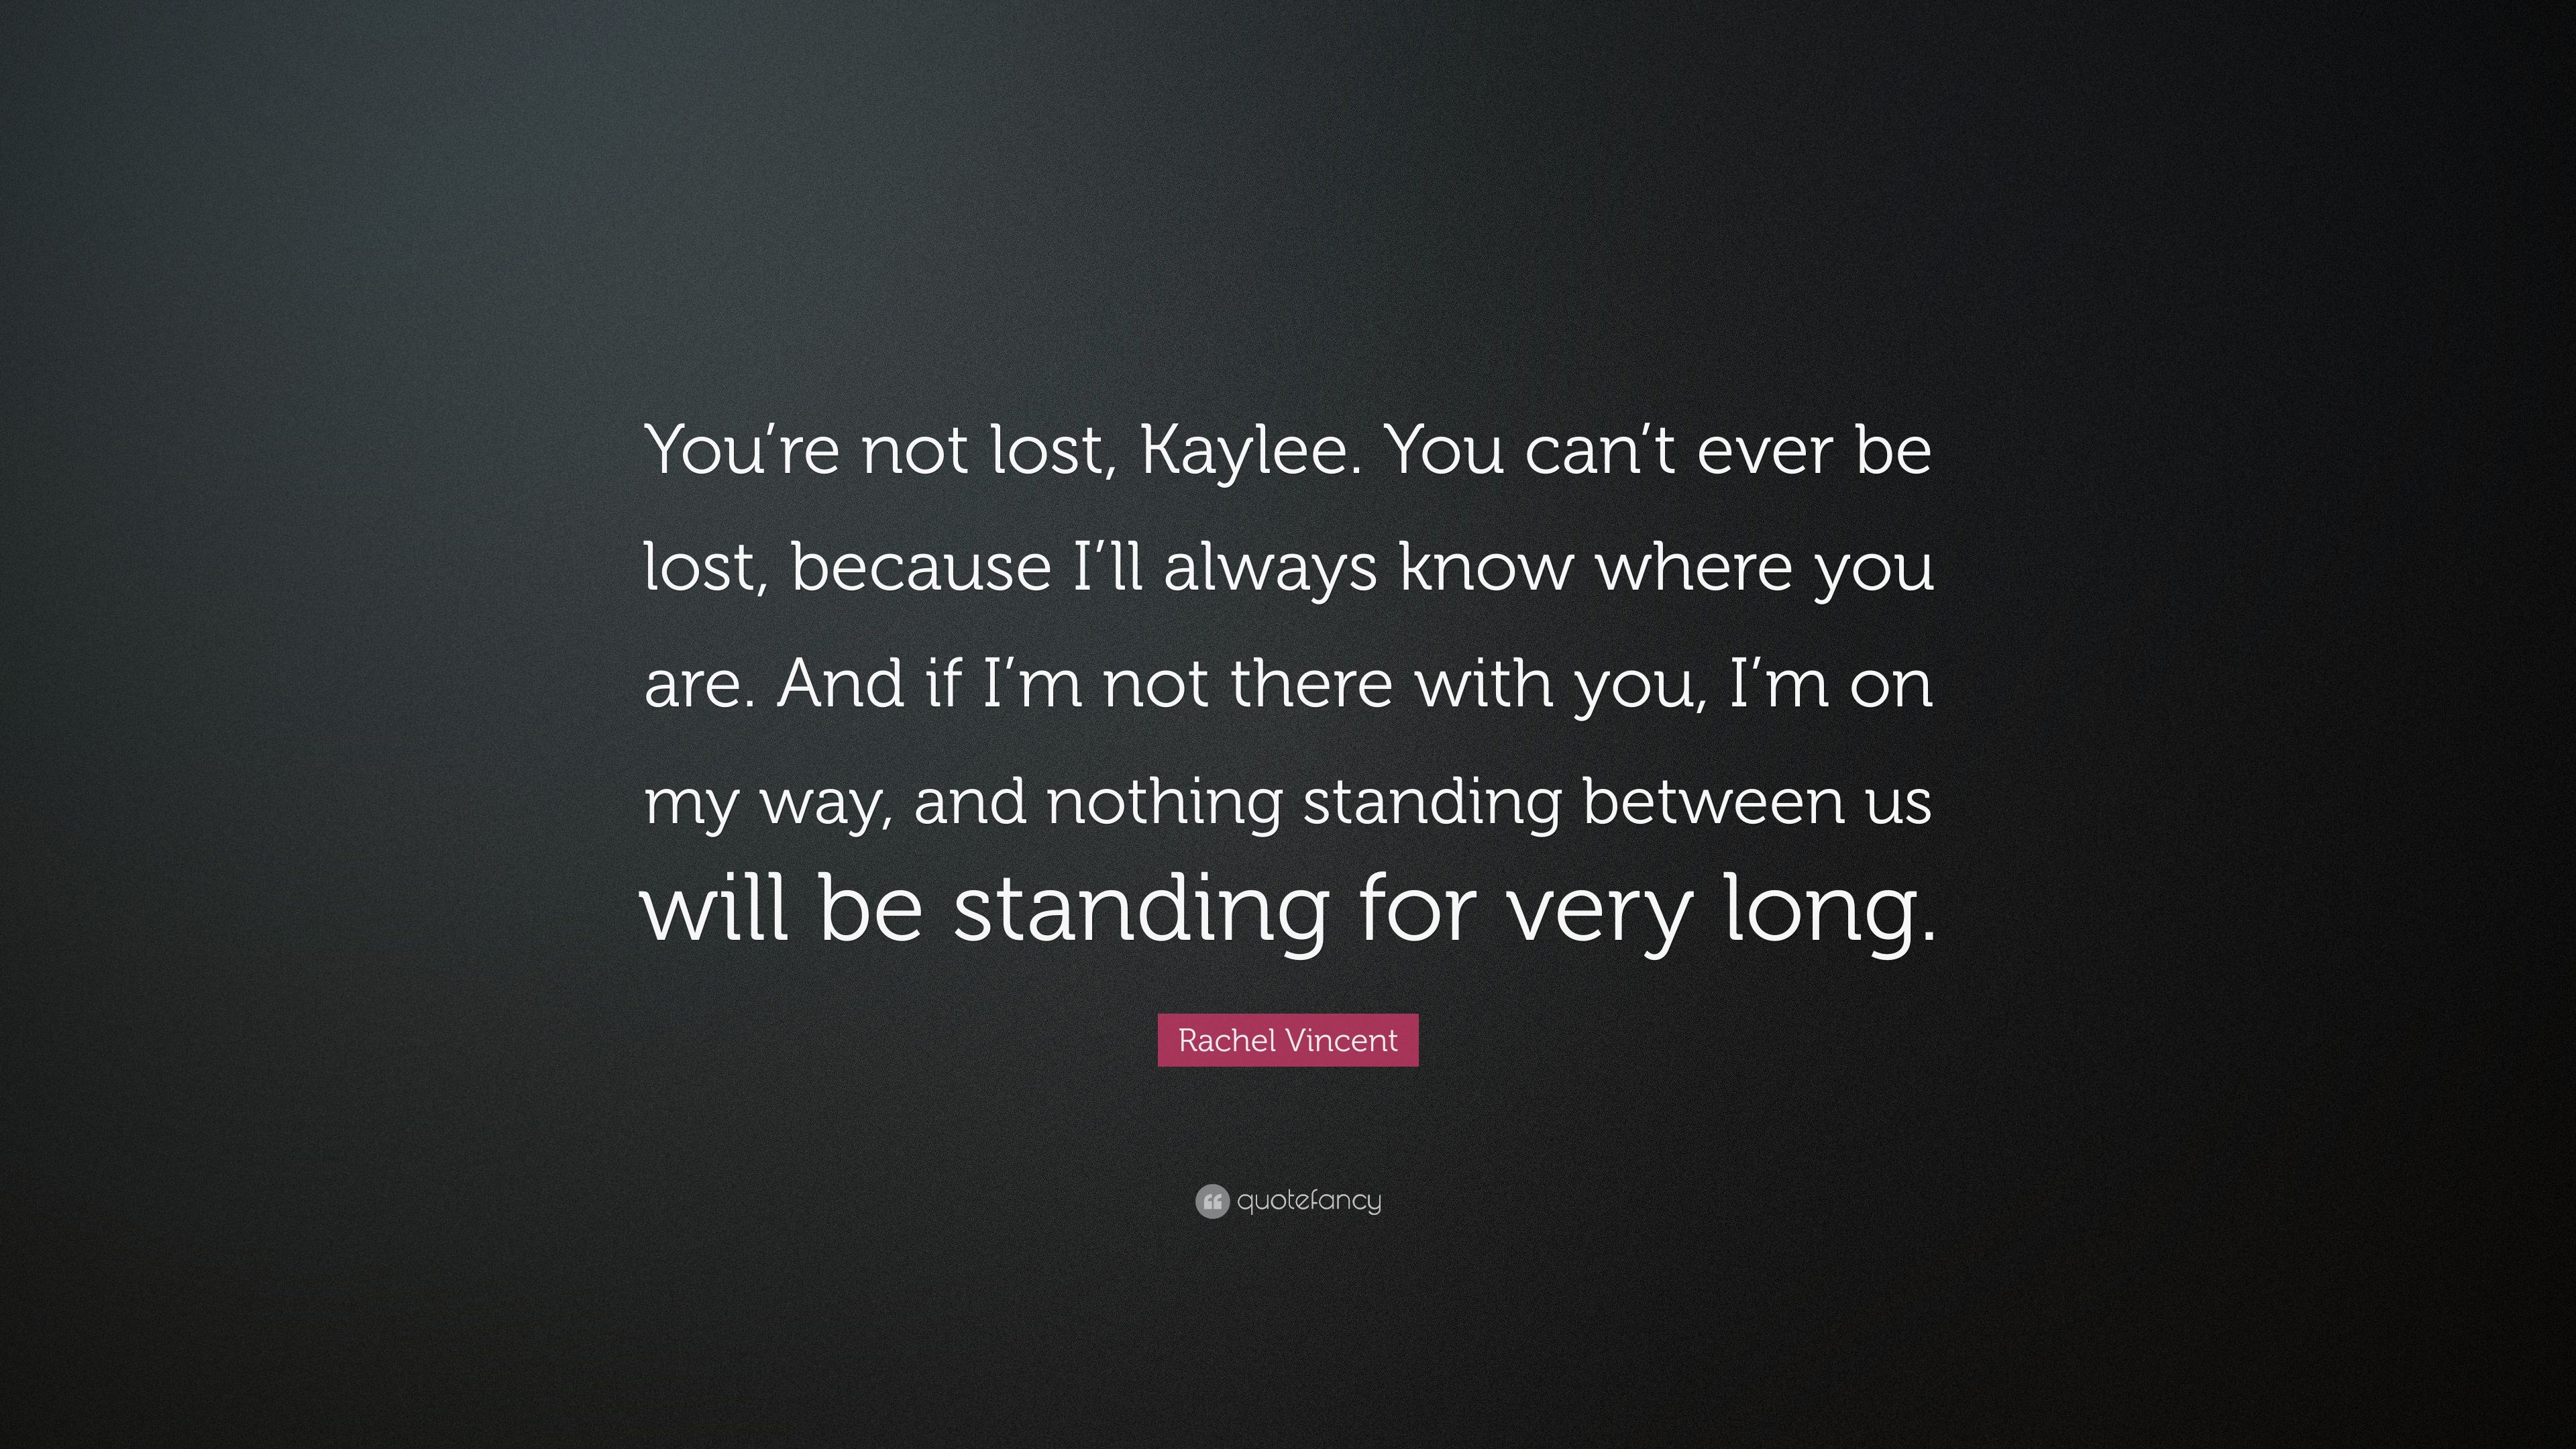 Rachel Vincent Quote: “You're not lost, Kaylee. You can't ever be ...